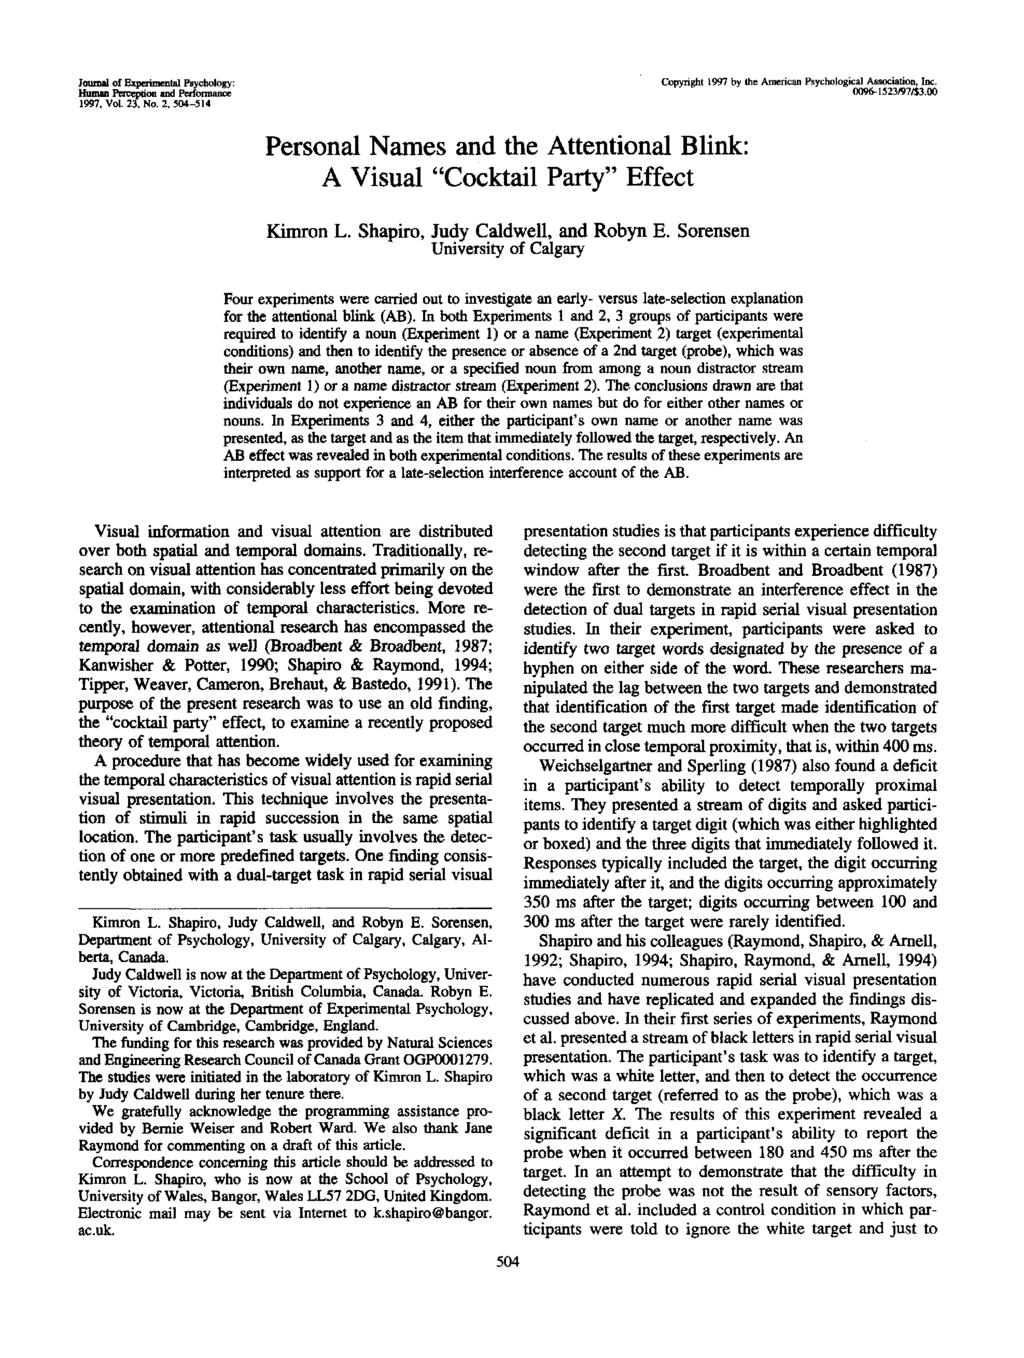 Journal of Experimental Psychology: 1997. Vol. 23, No. 2, 504-514 Copyright 1997 by Ihe American Psychological Association, Inc. 0096-1523/97/$3.